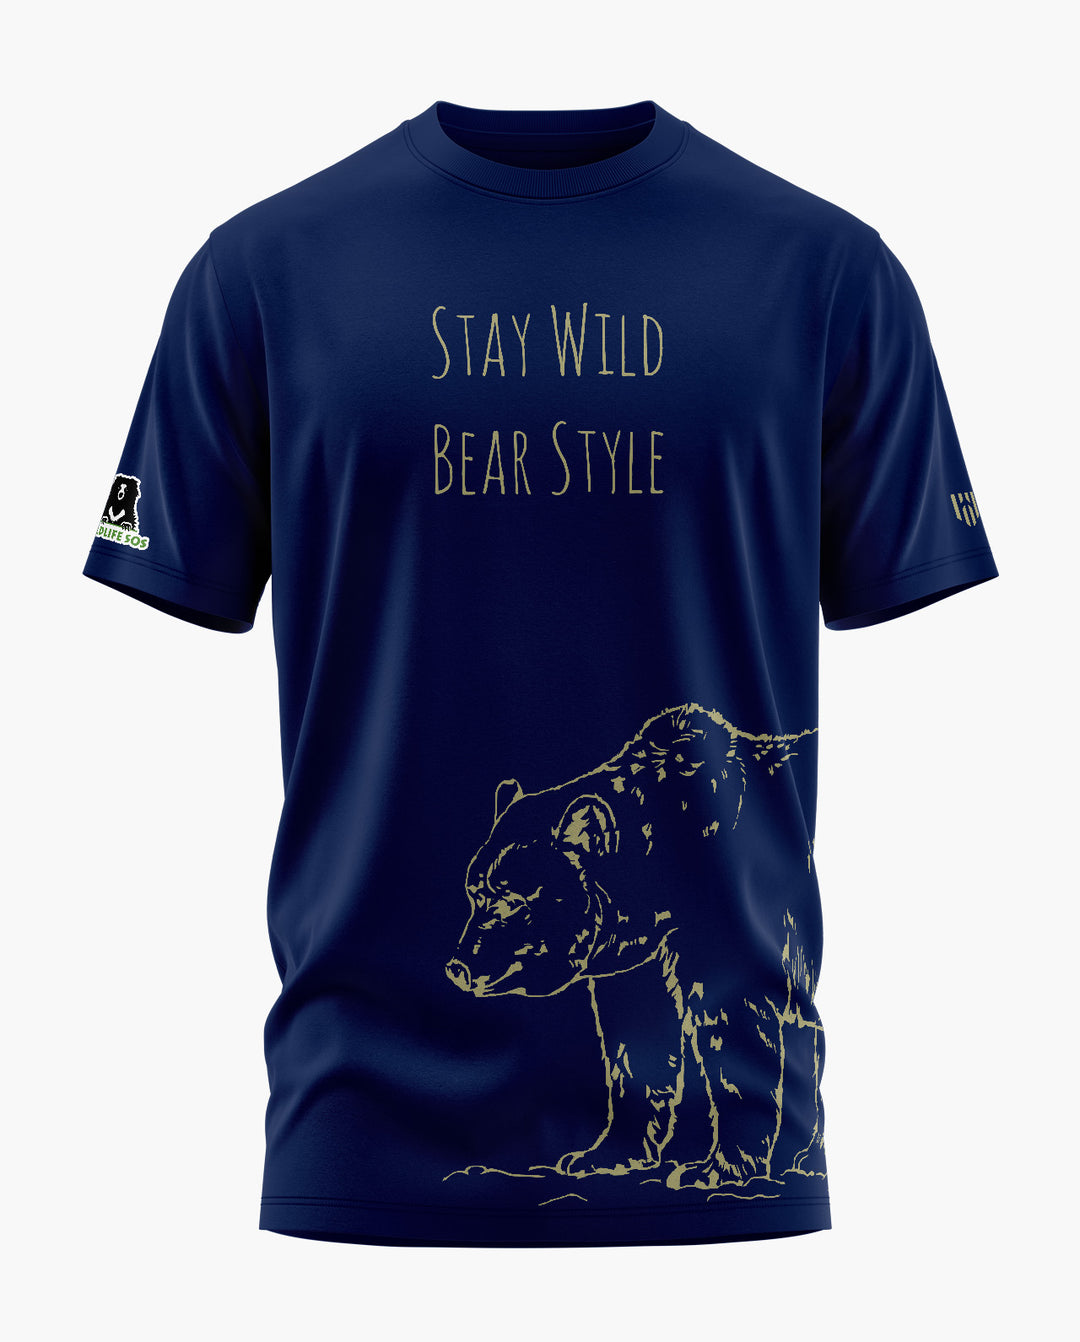 BEAR STYLE T-Shirt exclusive at Aero Armour